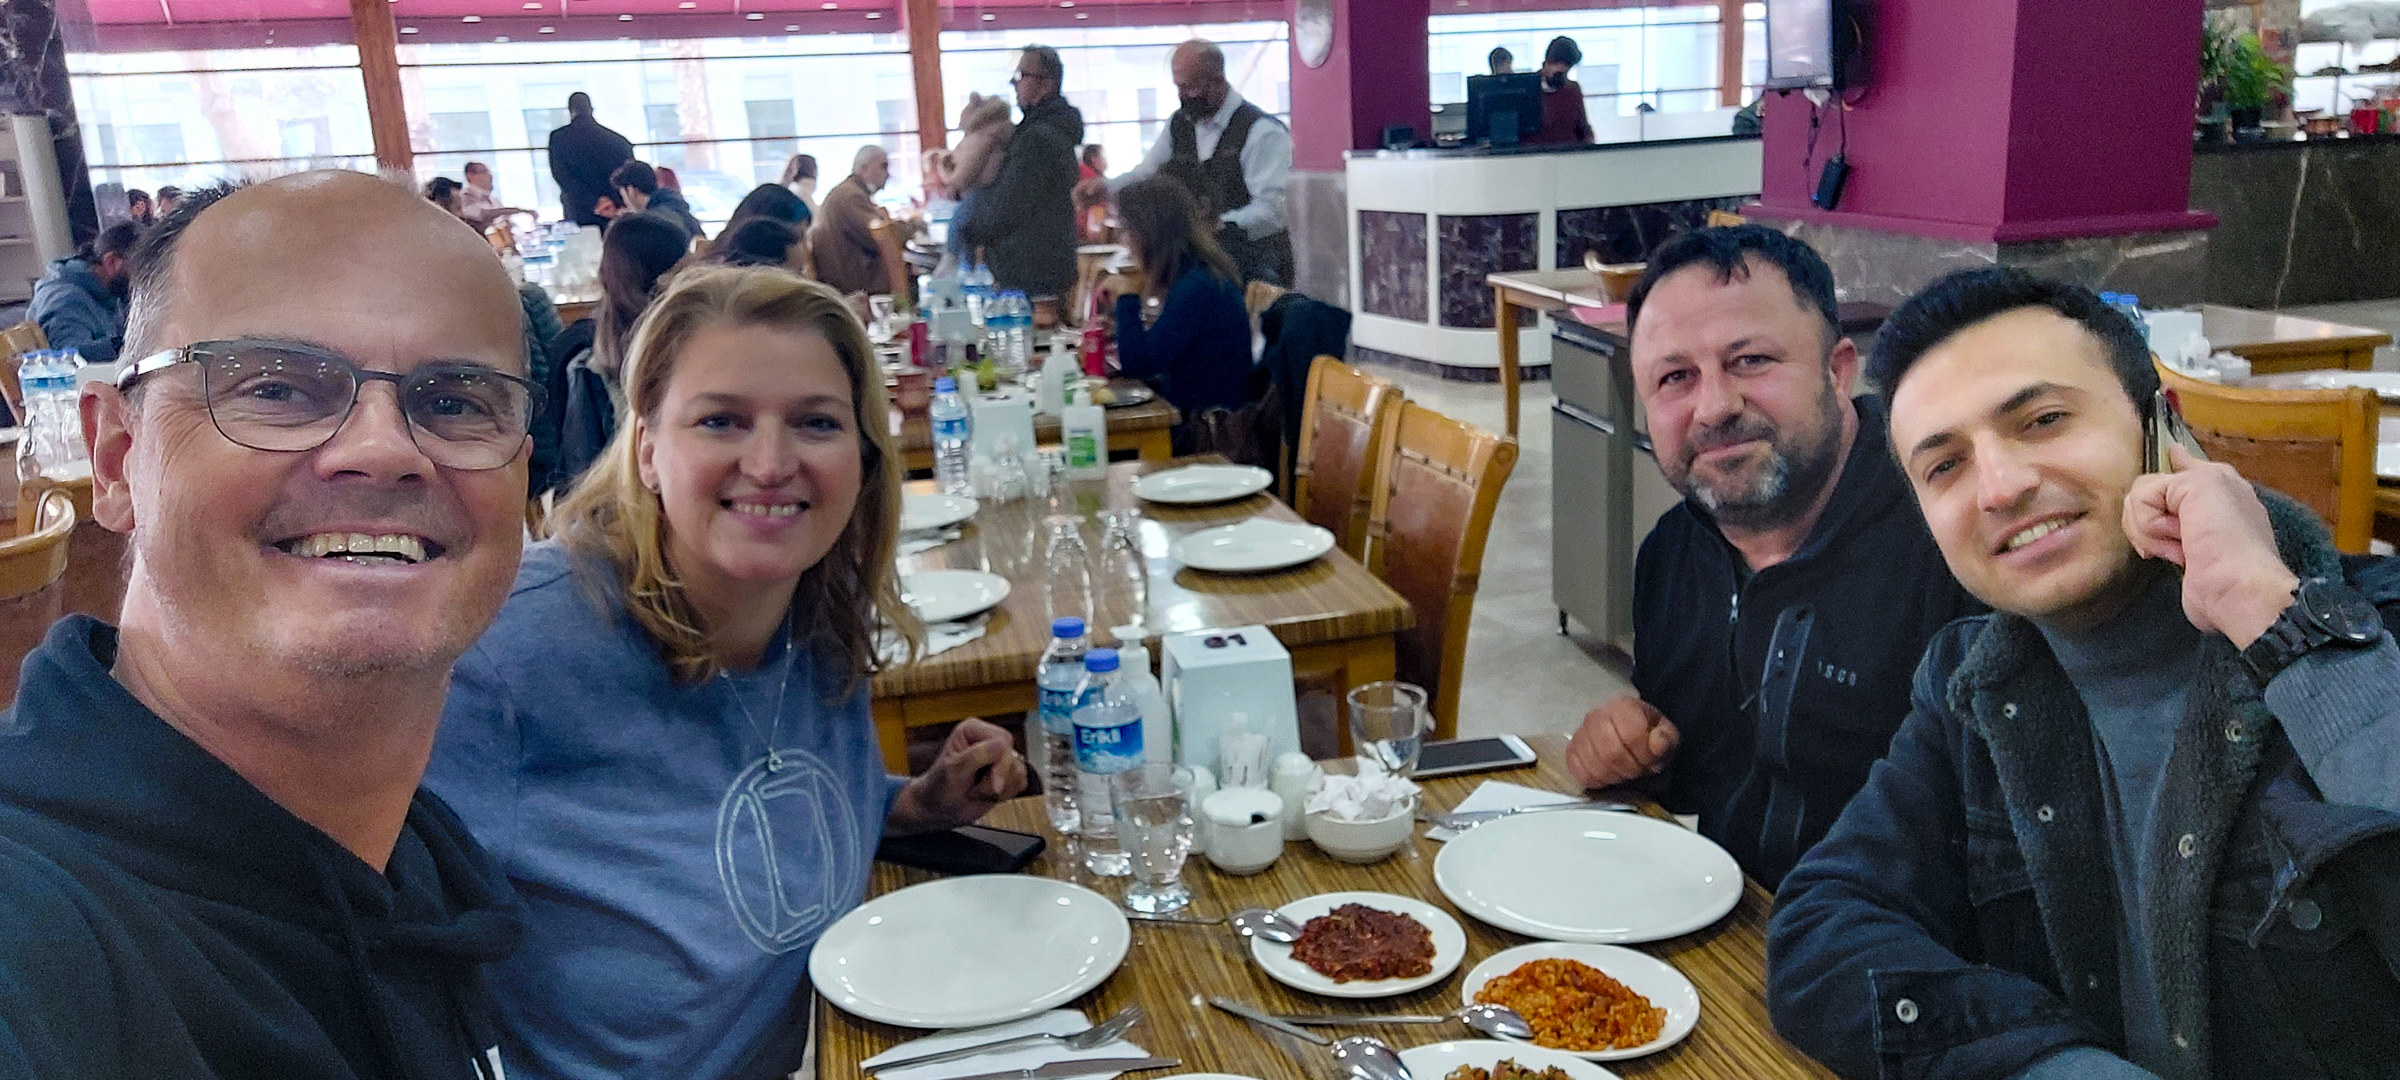 <span  class="uc_style_uc_tiles_grid_image_elementor_uc_items_attribute_title" style="color:#FFFFFF;">We had to buy new tires for Wischnewski. Every business in Turkey starts with an invitation for a meal (here: the team from 'Tatco Tires') - Thanks!</span>